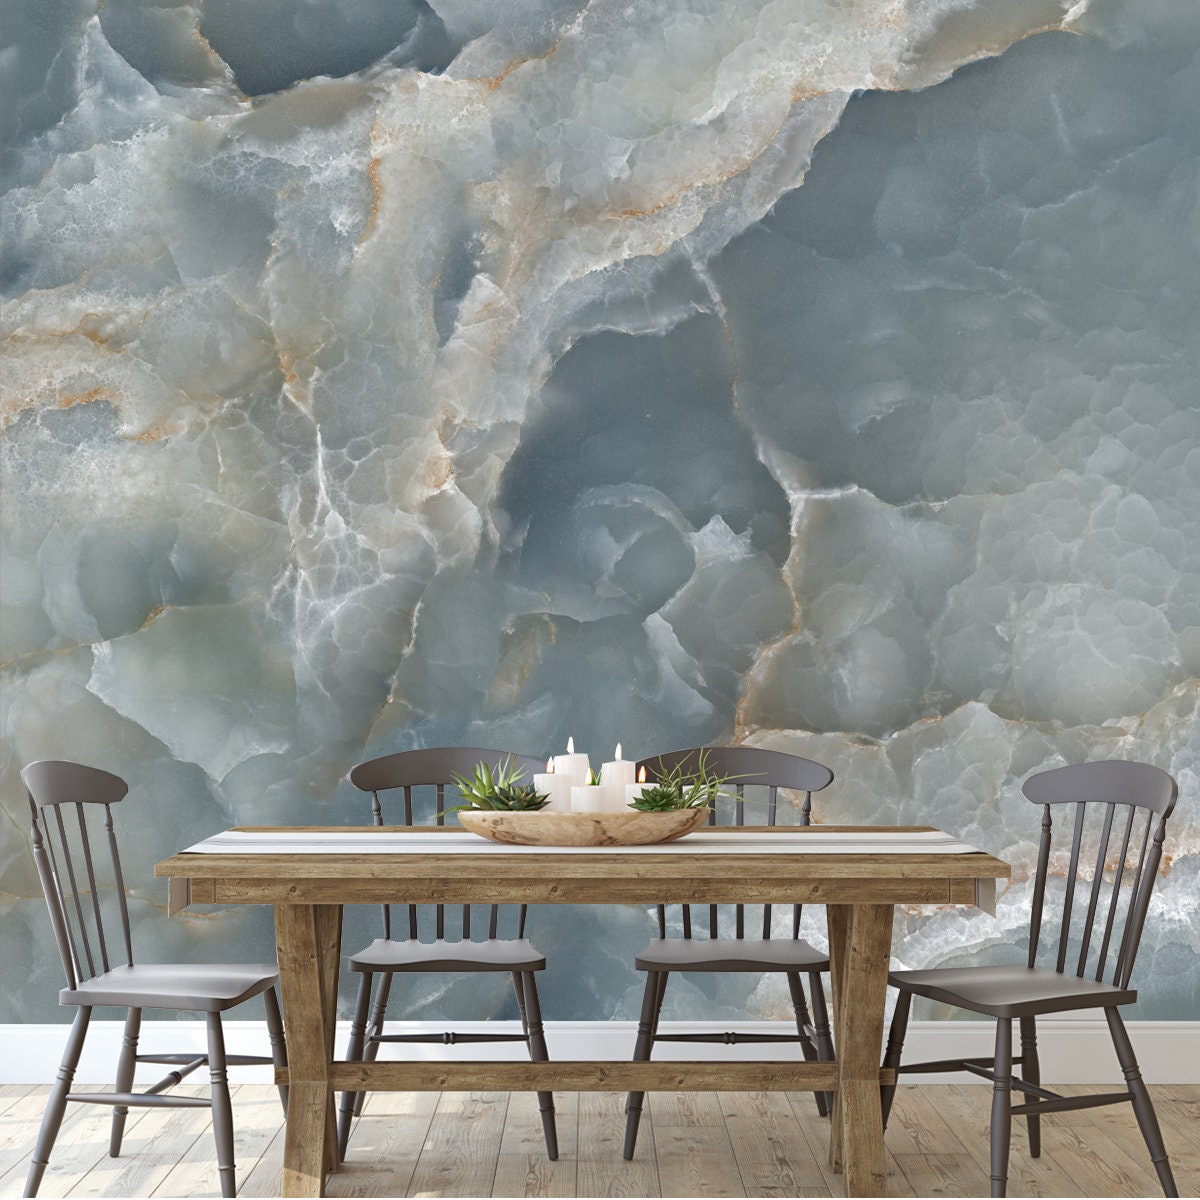 Marble Texture Background with High Resolution, Italian Marble Slab Wallpaper Dining Room Mural